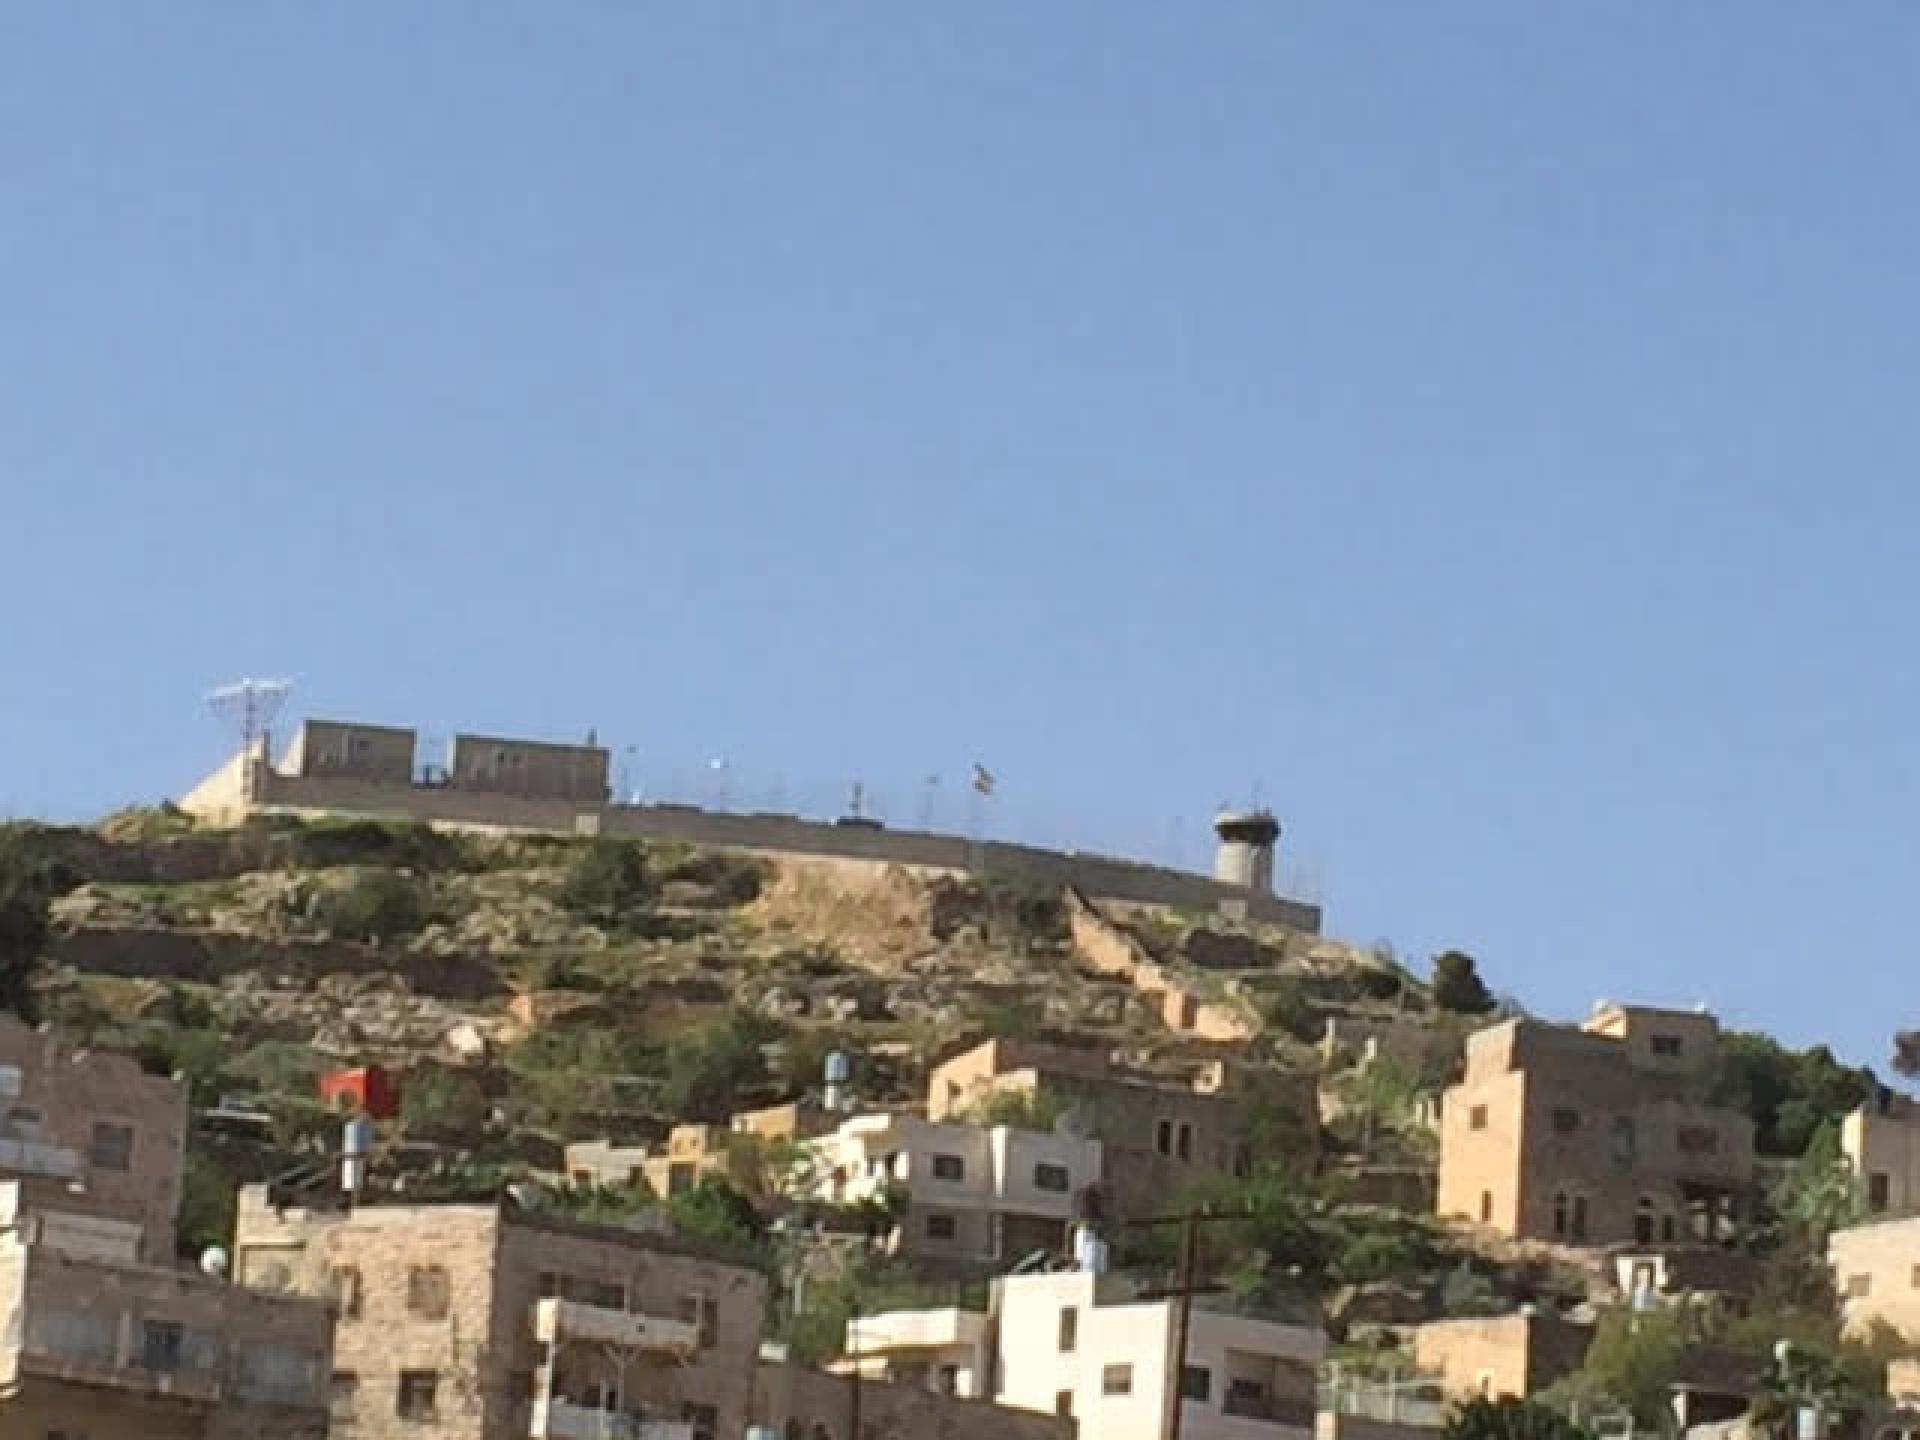 The pillbox above the Abu Snan neighborhood with the base built around it. Photographed from Gross Square